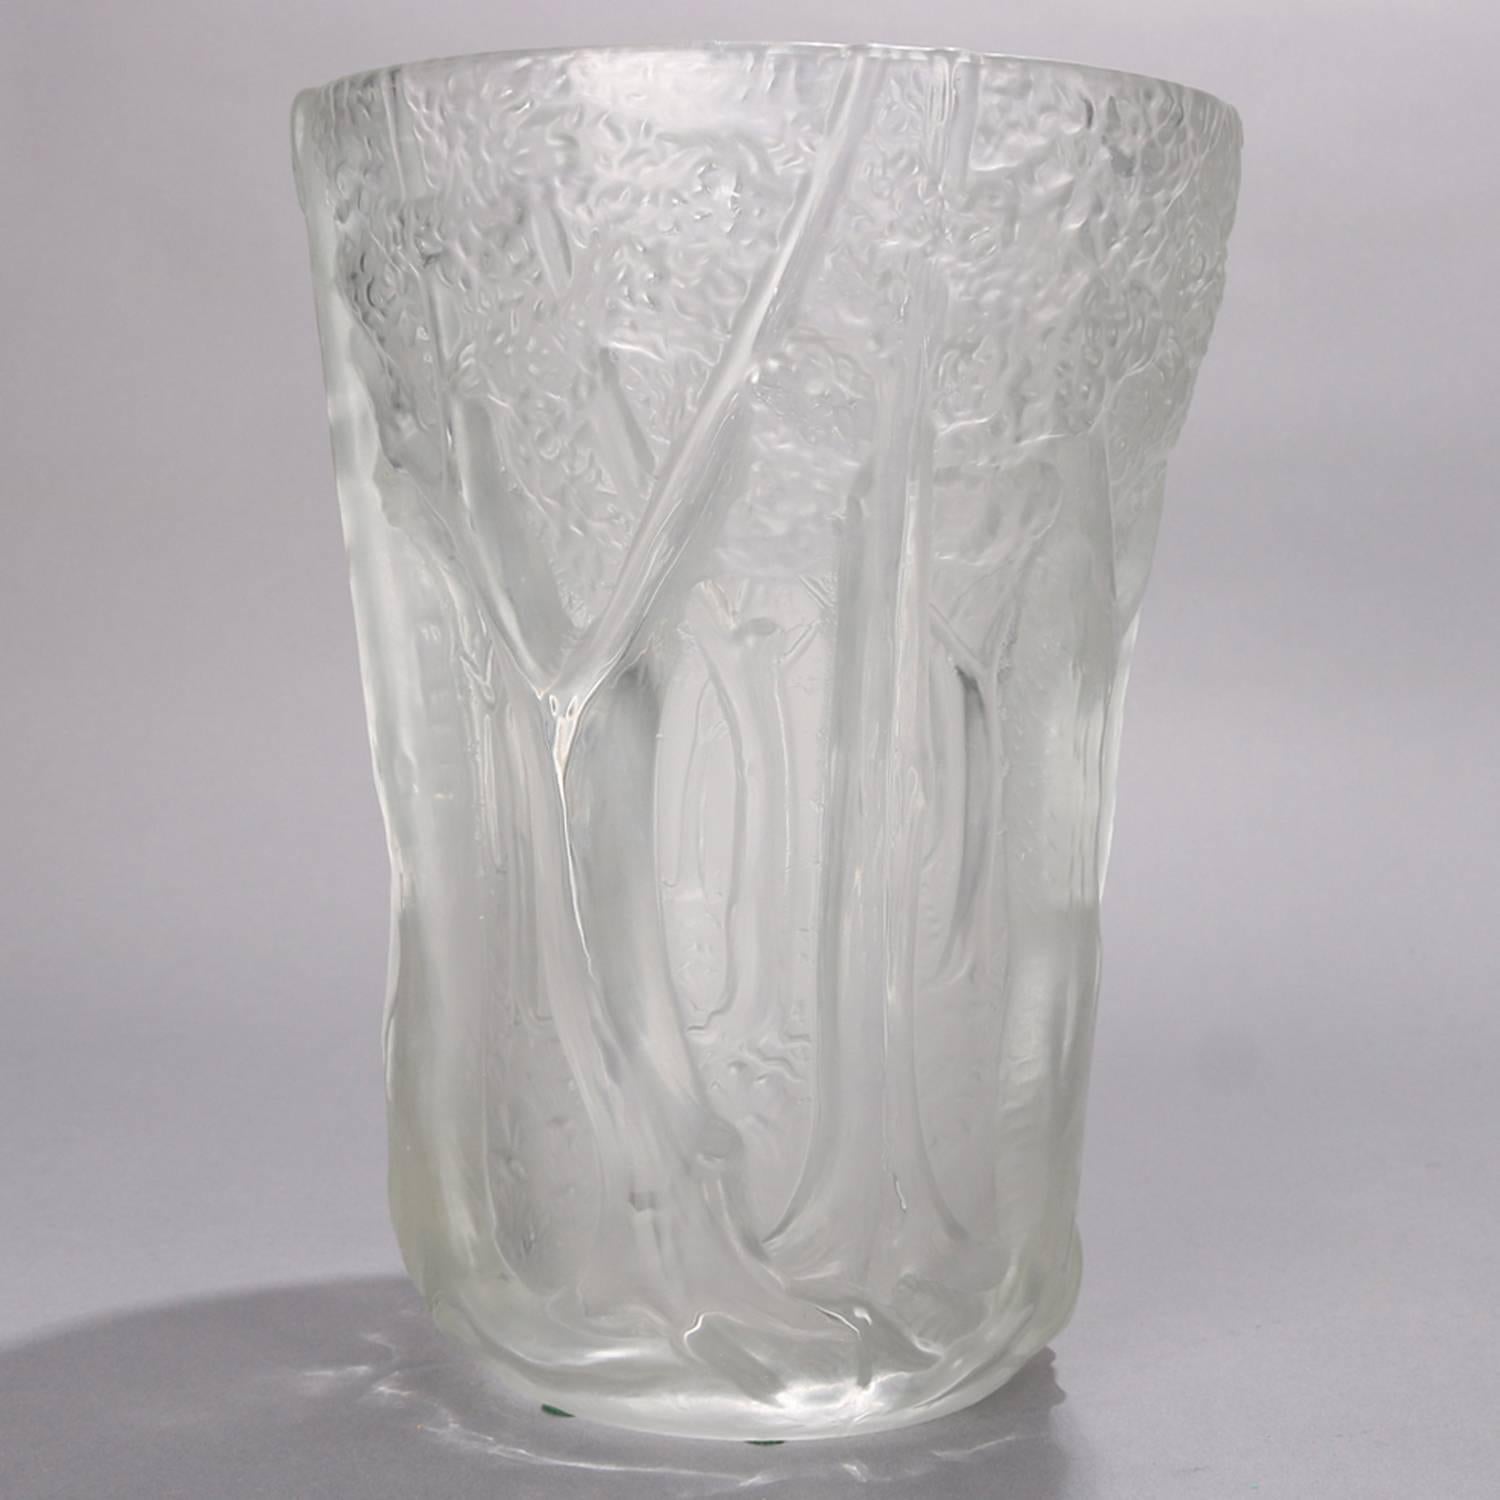 French Lalique School frosted crystal glass vase features flared cylinder form with allover high relief woodland forest scene, 20th century

Measures: 10.25